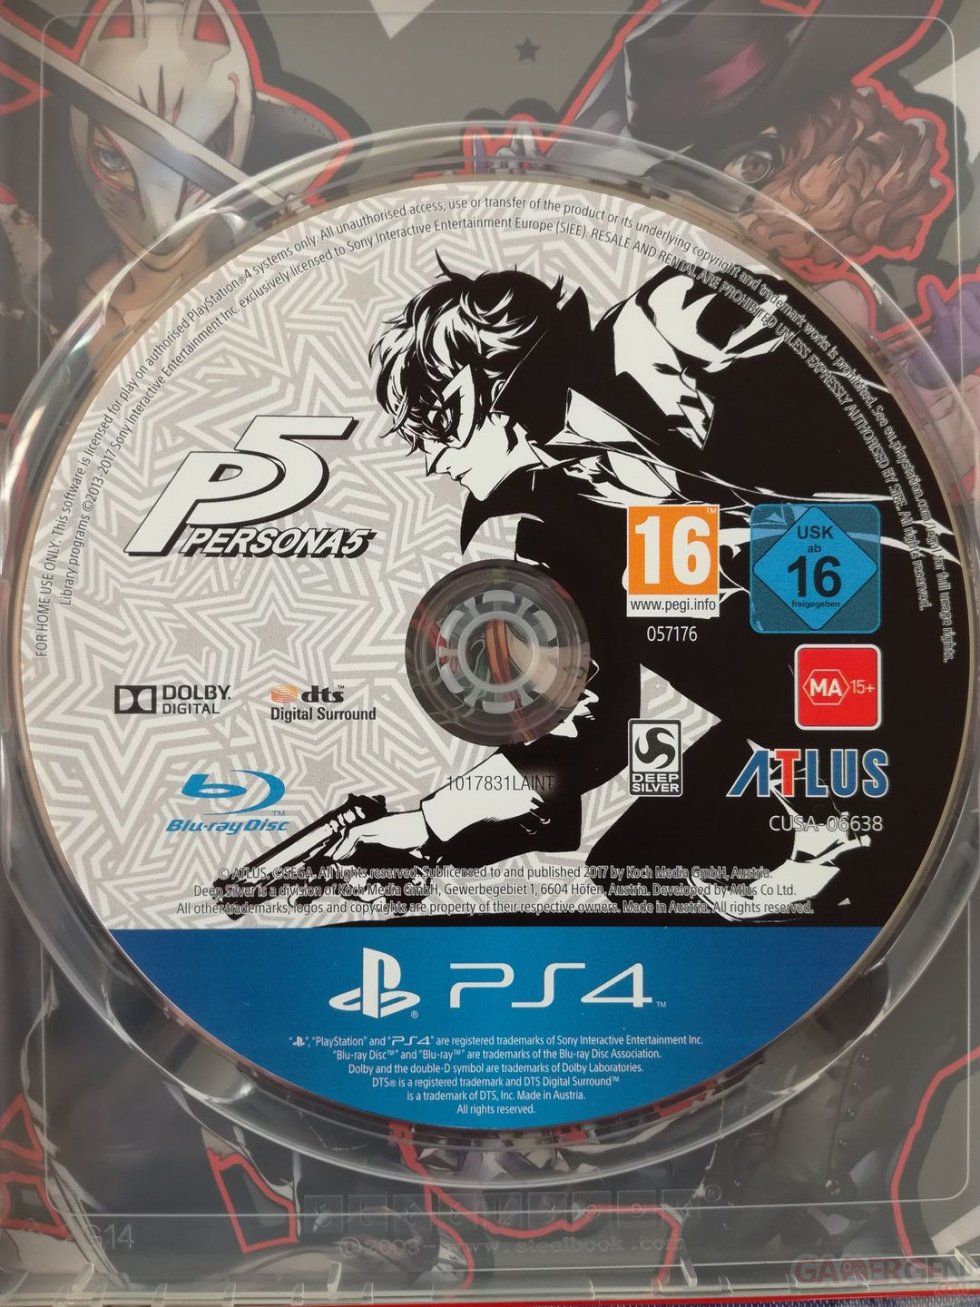 Persona-5-P5-collector-Take-Your-Heart-Premium-Edition-unboxing-deballage-20-04-04-2017